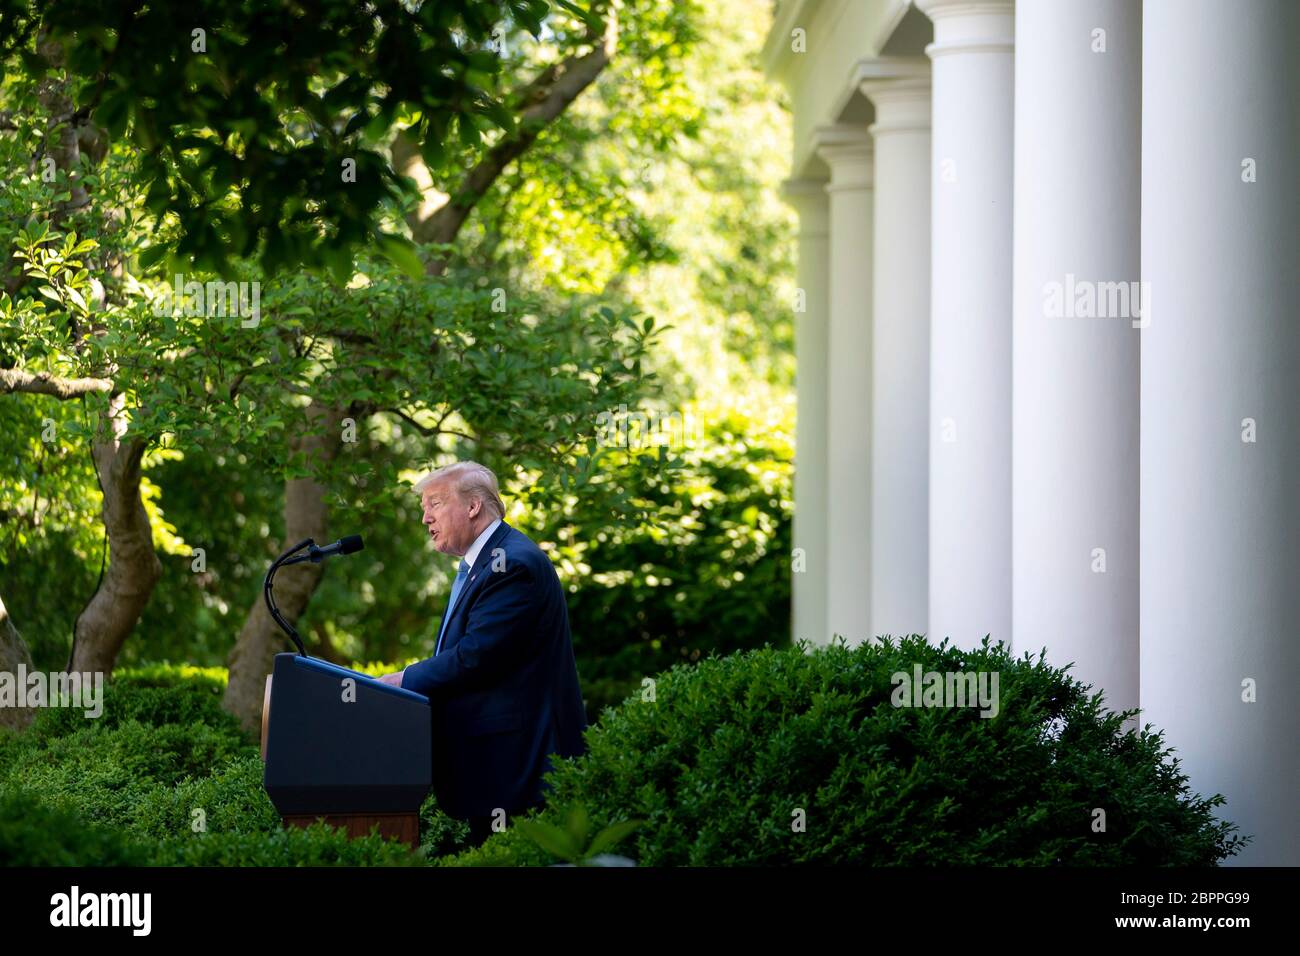 U.S. President Donald Trump delivers remarks during the Presidential Recognition Ceremony: Hard Work, Heroism, and Hope in the Rose Garden of the White House May 15, 2020 in Washington, D.C. The event honored front line workers battling the COVID-19, coronavirus pandemic. Stock Photo